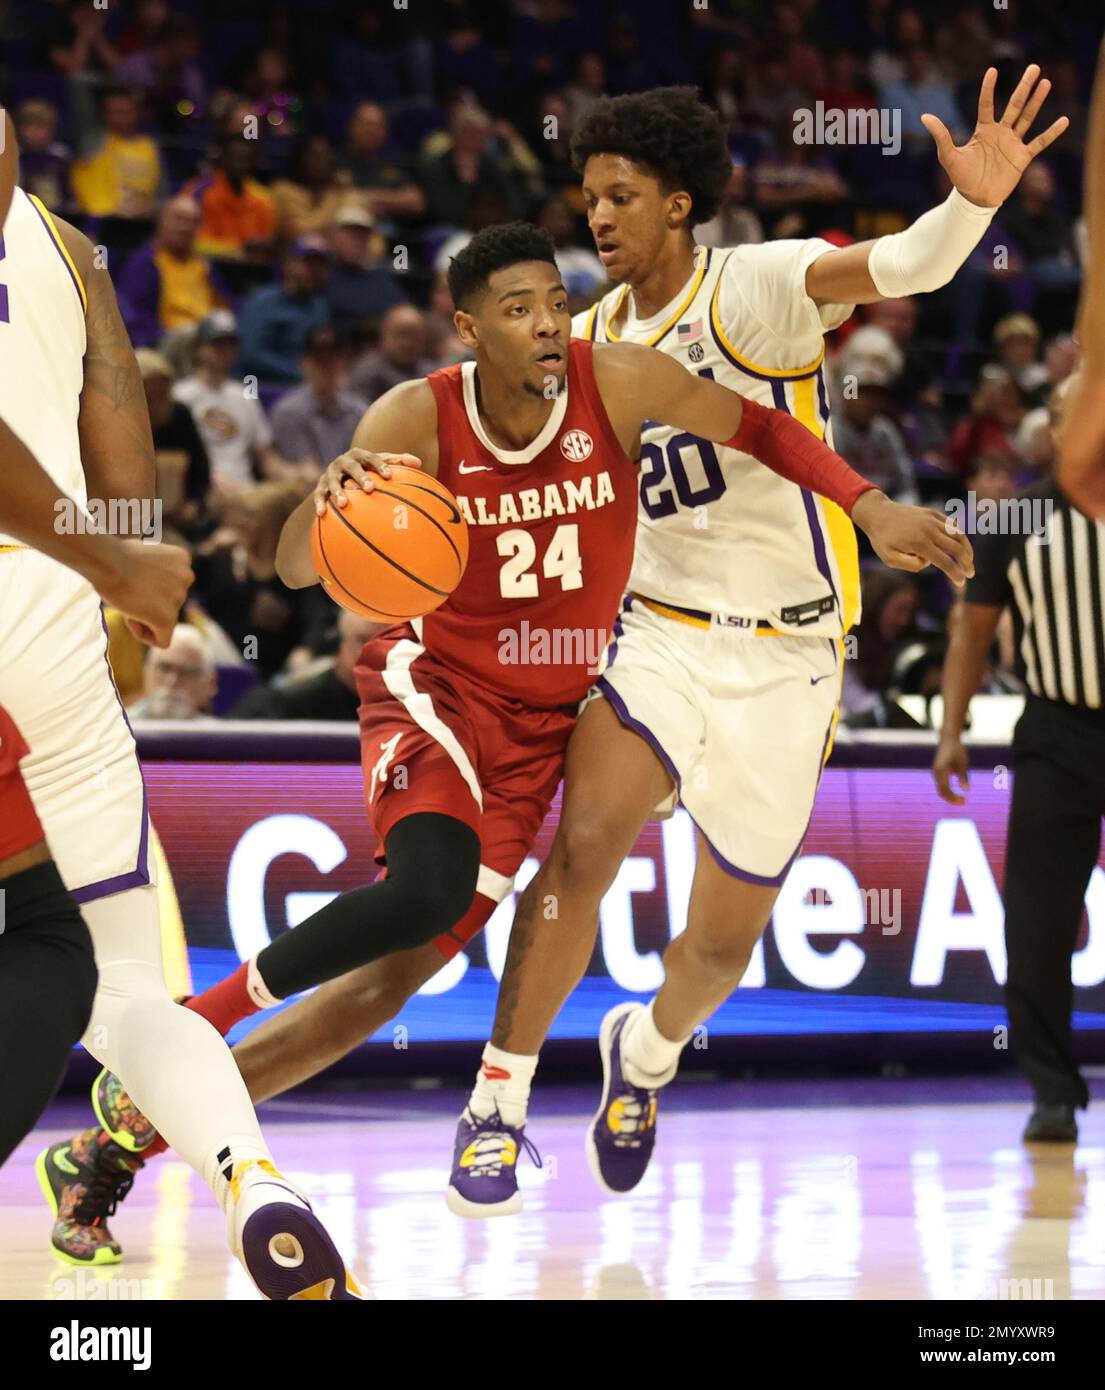 Baton Rouge, USA. 04th Feb, 2023. Alabama Crimson Tide forward Brandon Miller (24) tries to drive past LSU Tigers forward Derek Fountain (20) during a men's college basketball game at the Pete Maravich Assembly Center in Baton Rouge, Louisiana on Saturday, February 4, 2023. (Photo by Peter G. Forest/Sipa USA) Credit: Sipa USA/Alamy Live News Stock Photo